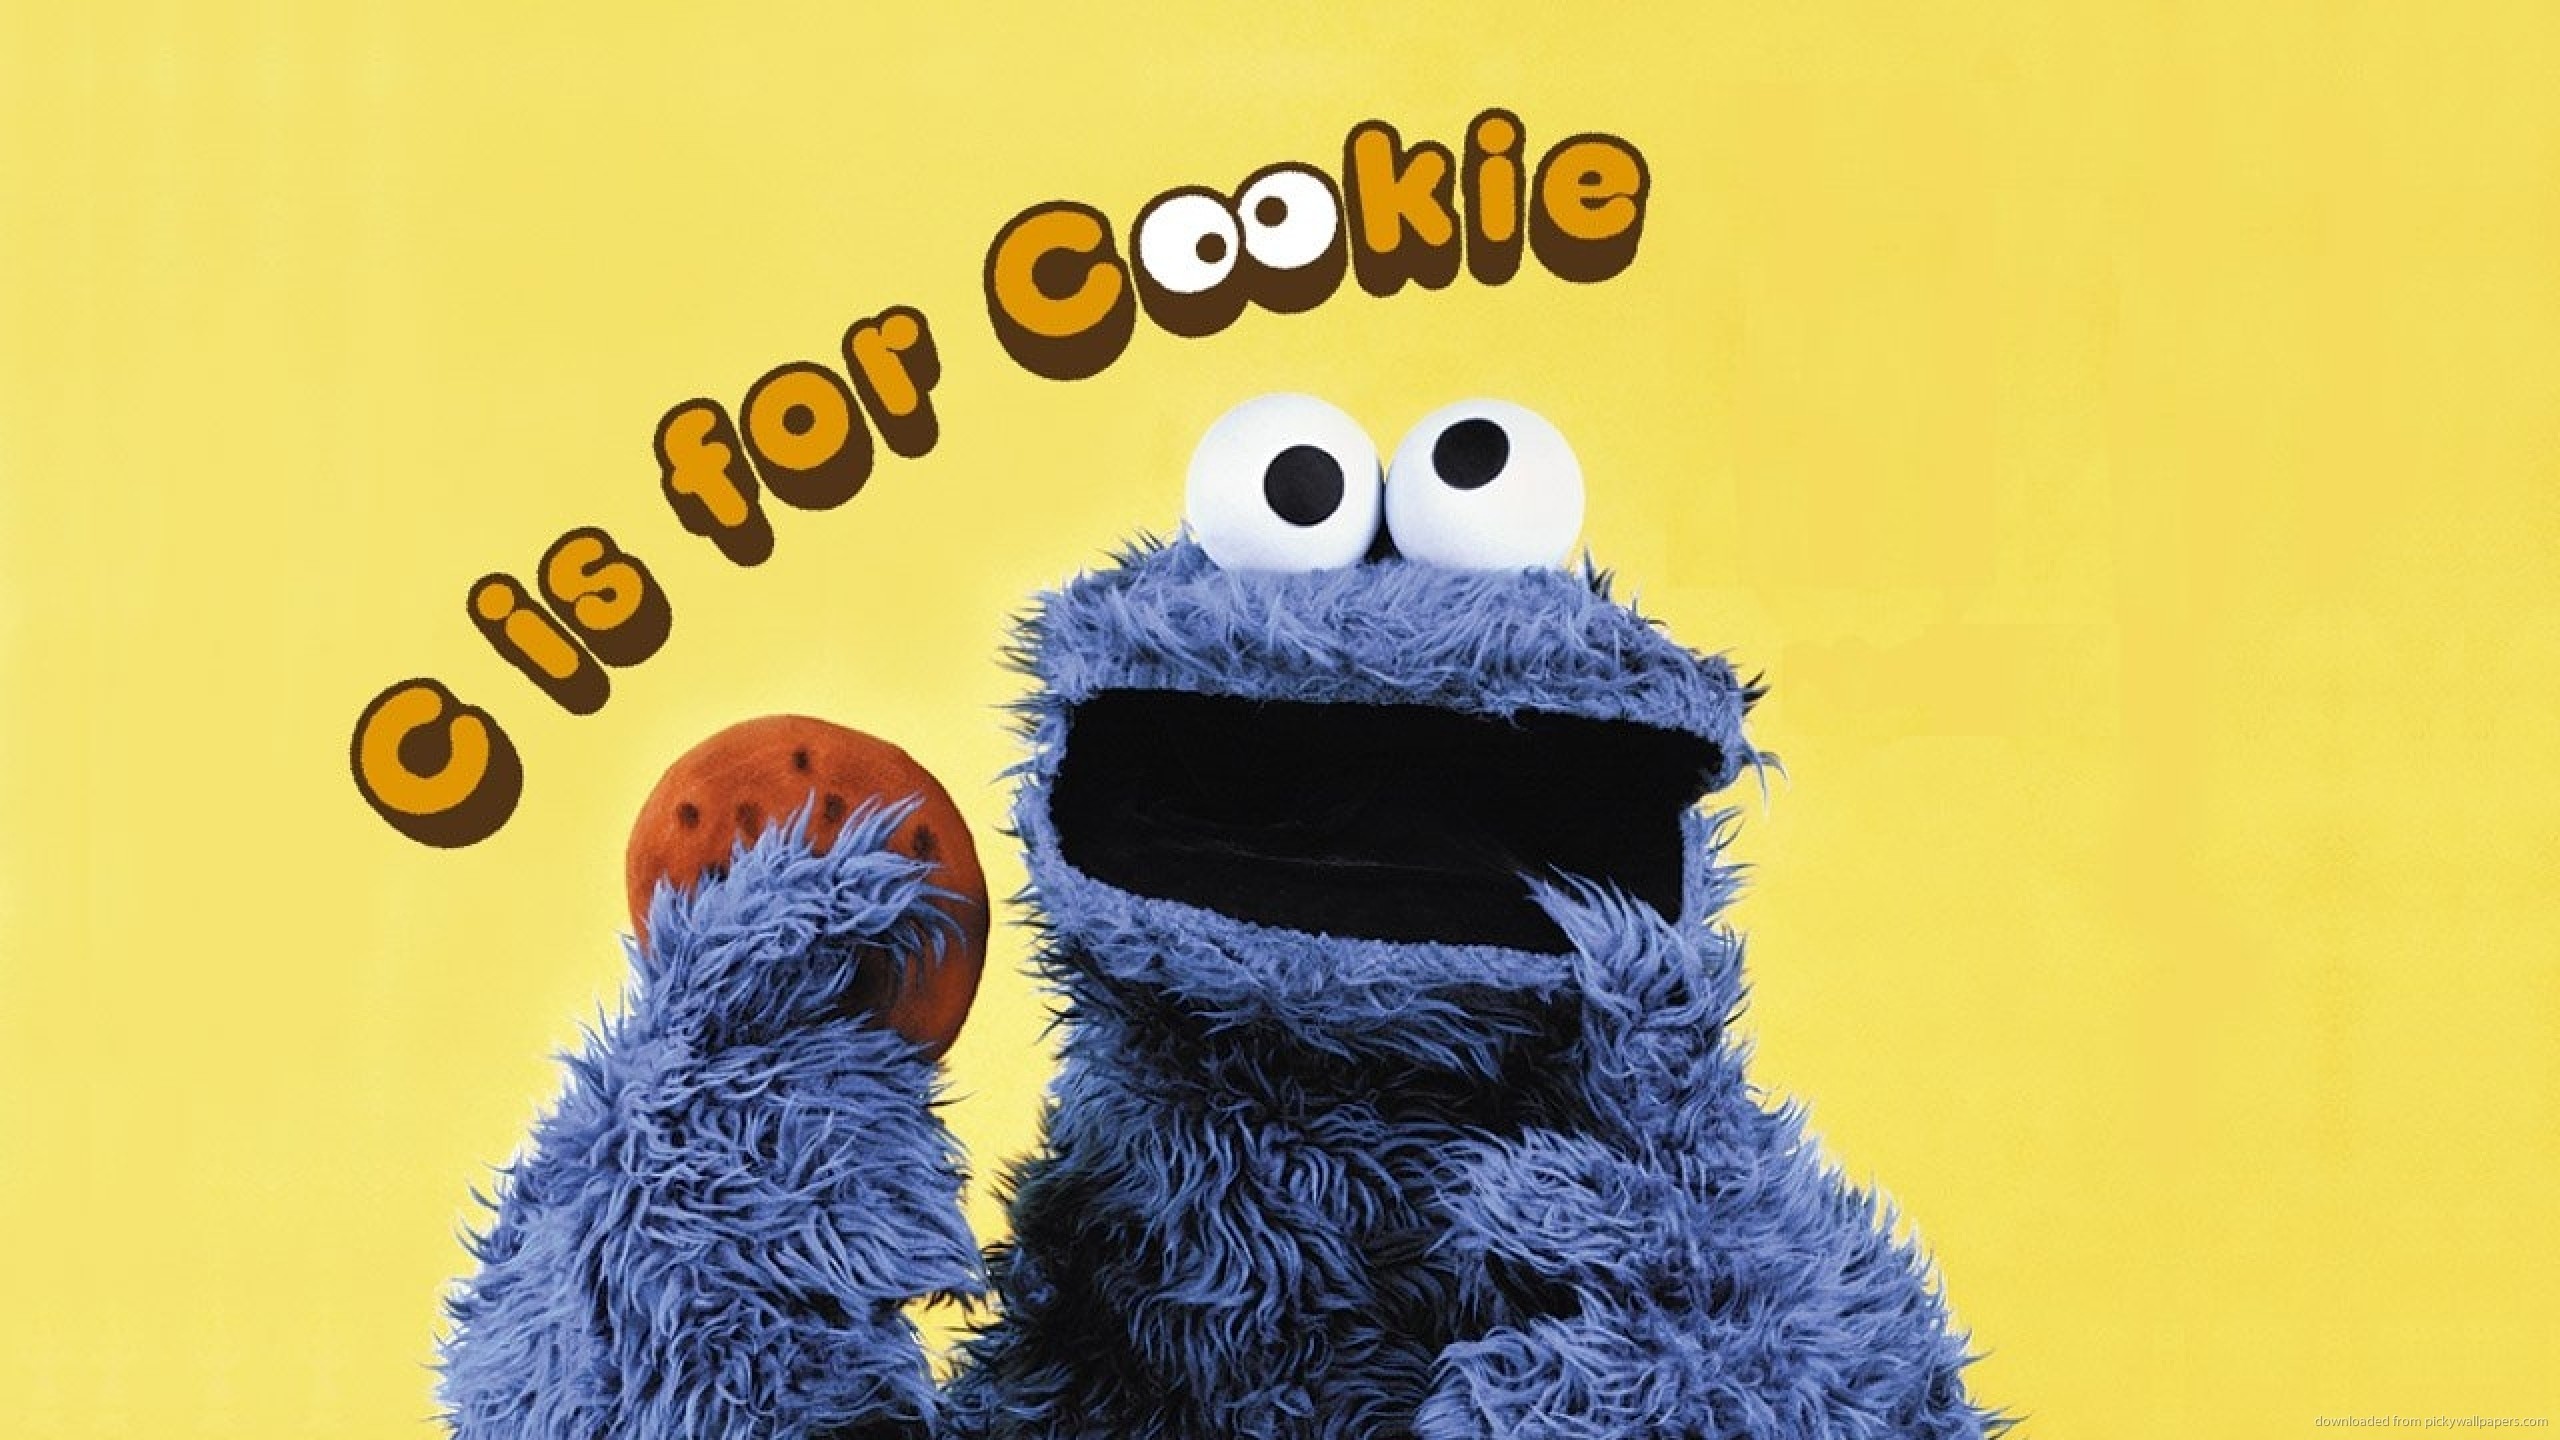 2560x1440 Cookie Monster C Is For Cookie for 